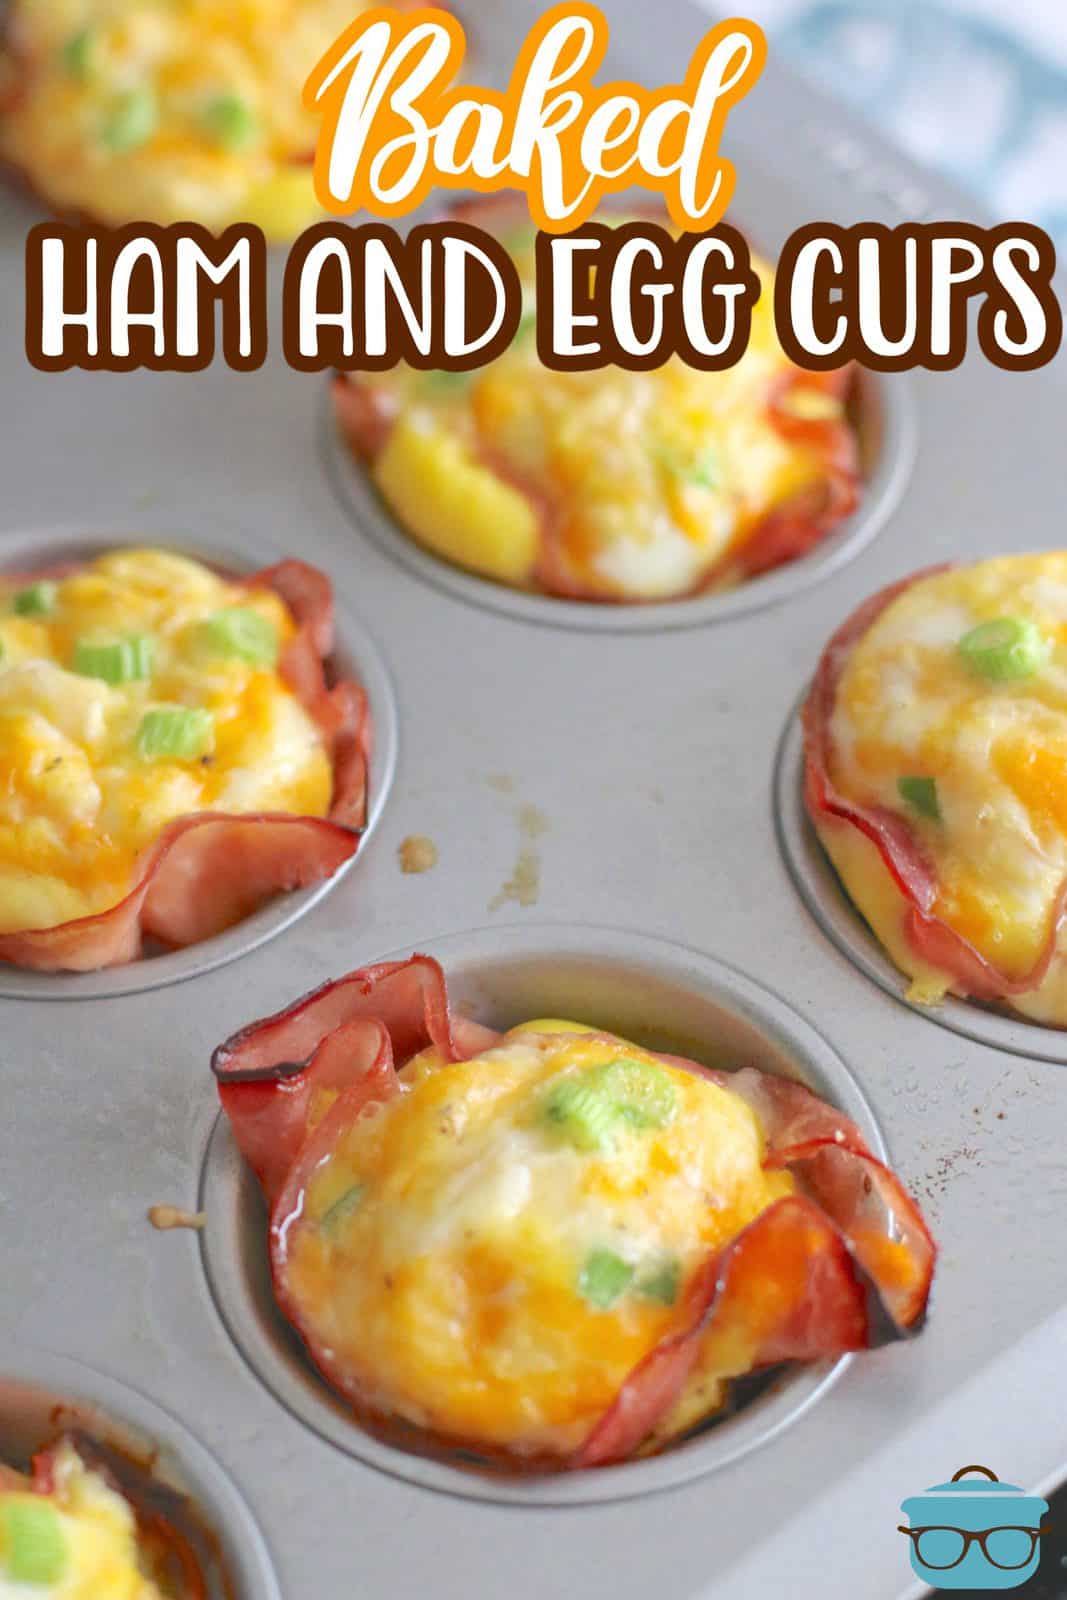 Baked Ham and Egg Cups shown fully baked in a muffin tin.